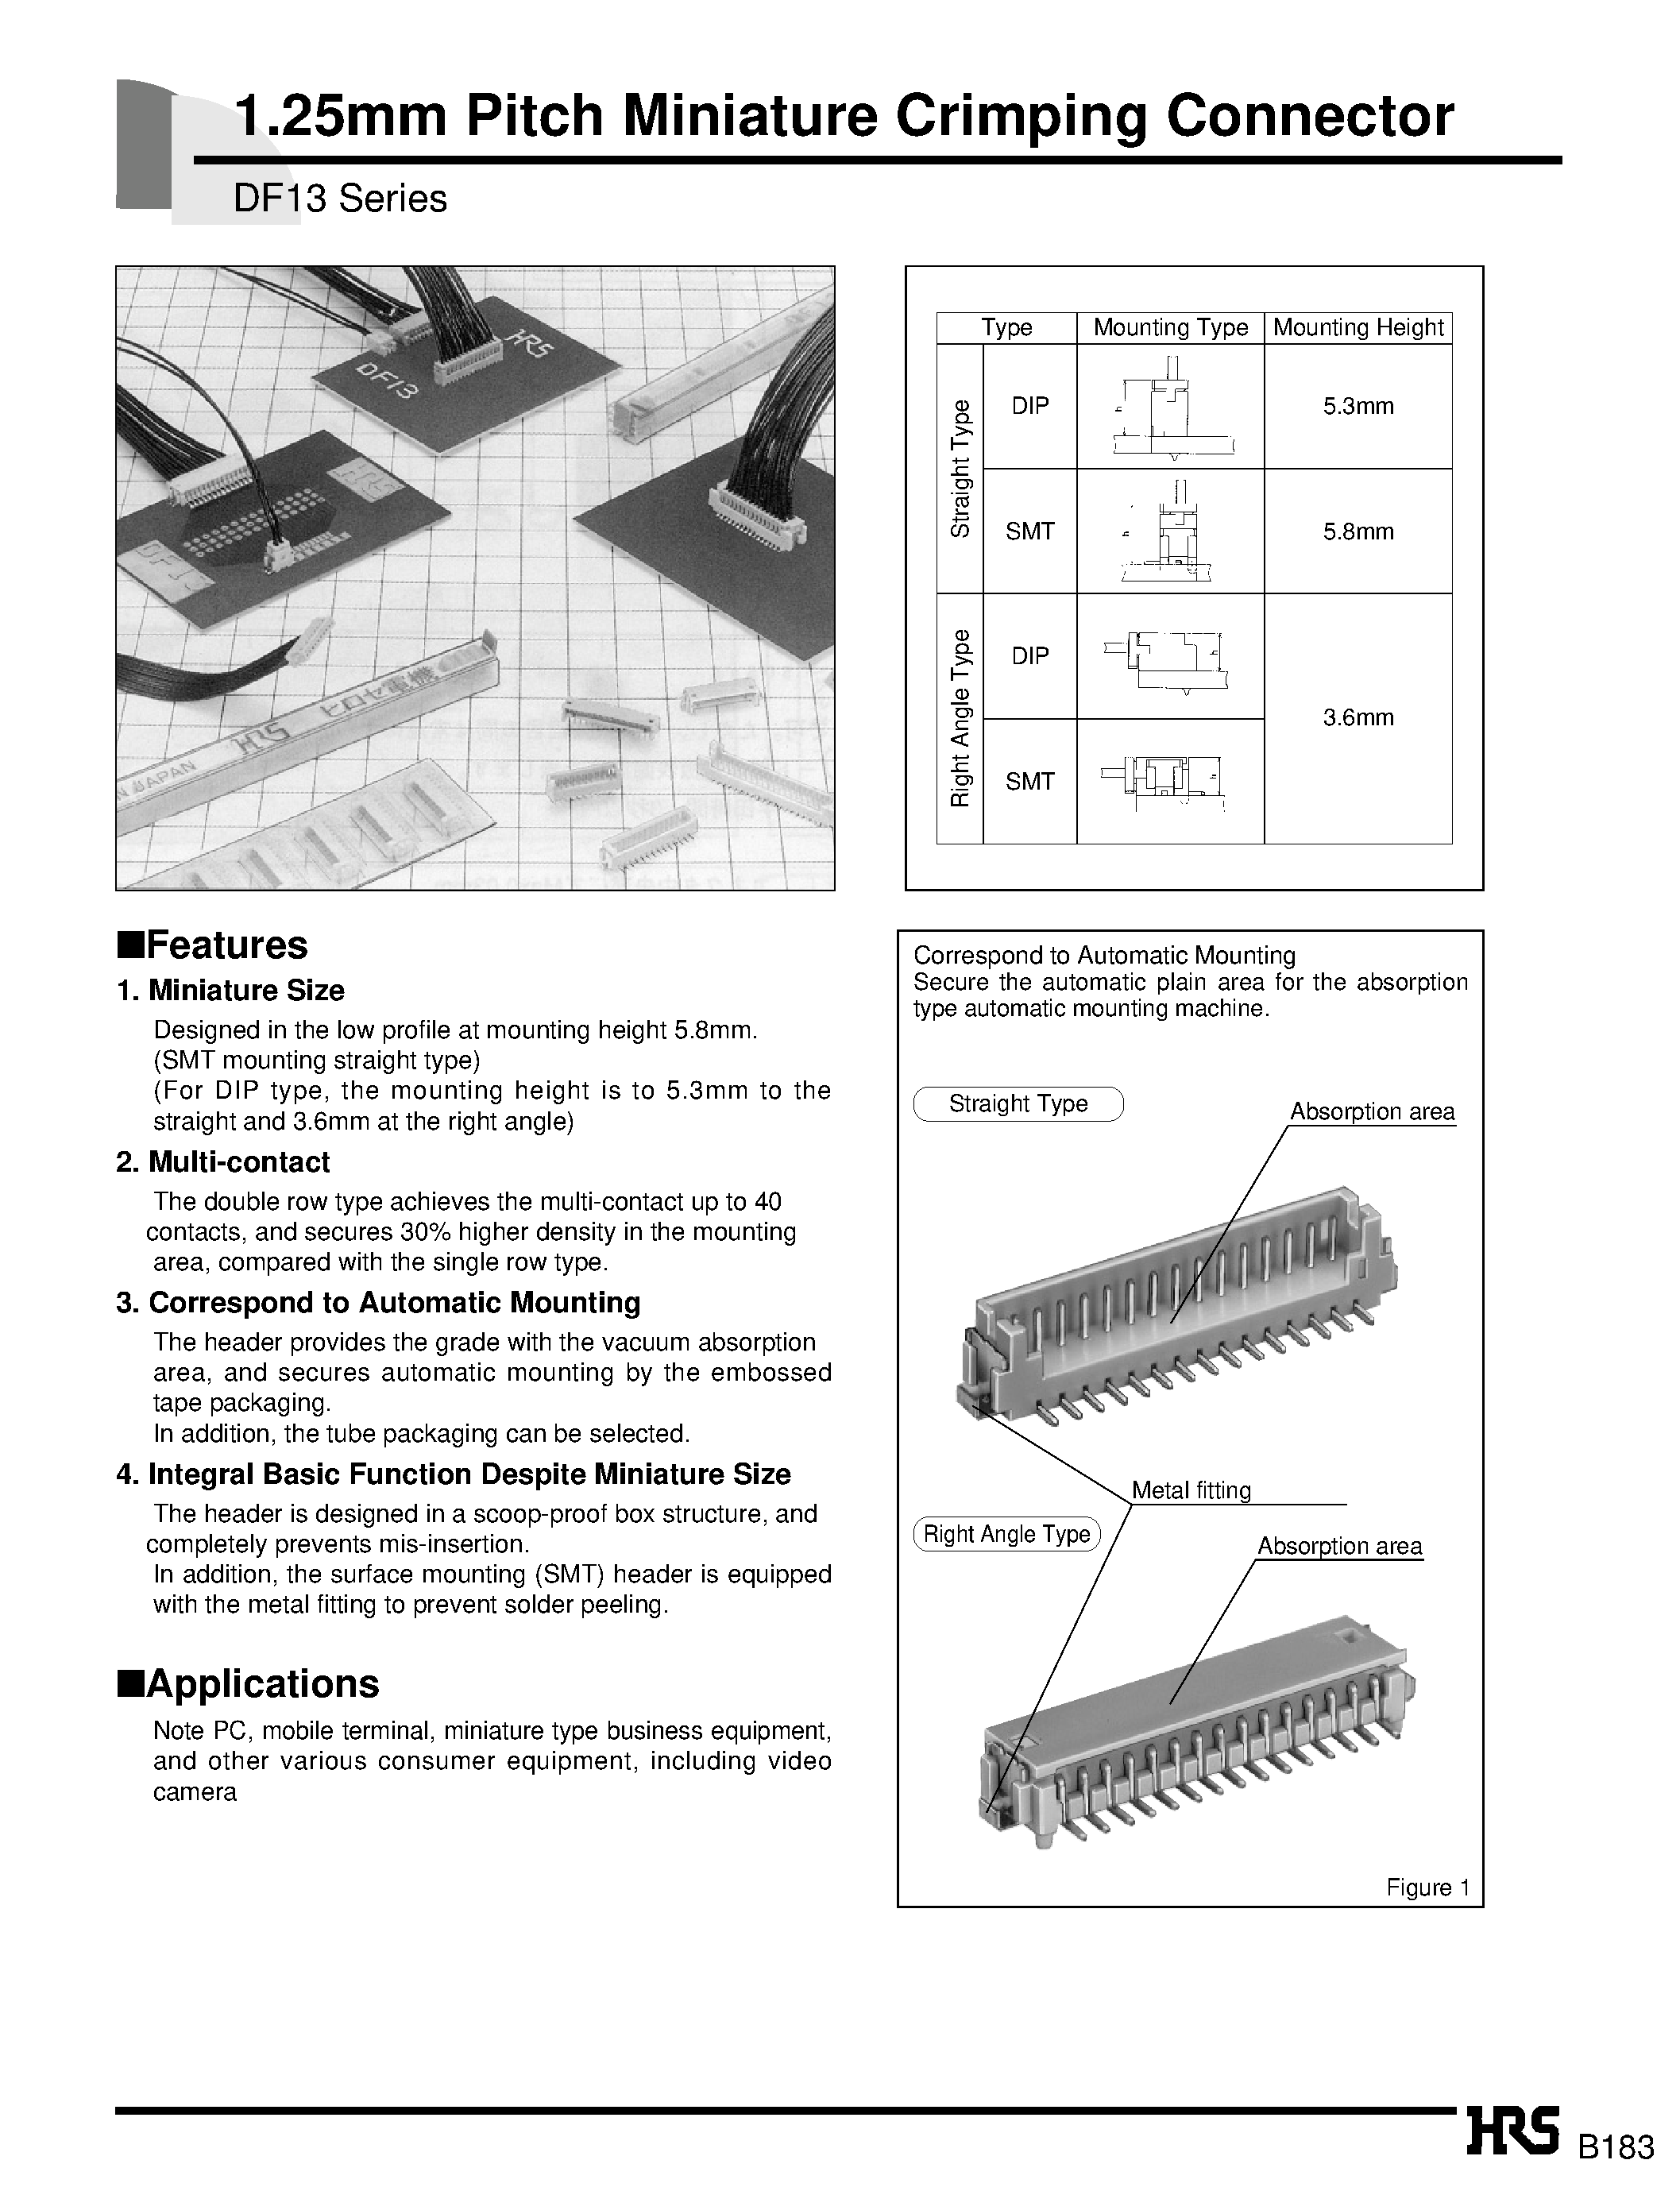 Datasheet DF13-10DS-1.25DSA - 1.25mm Pitch Miniature Crimping Connector page 1